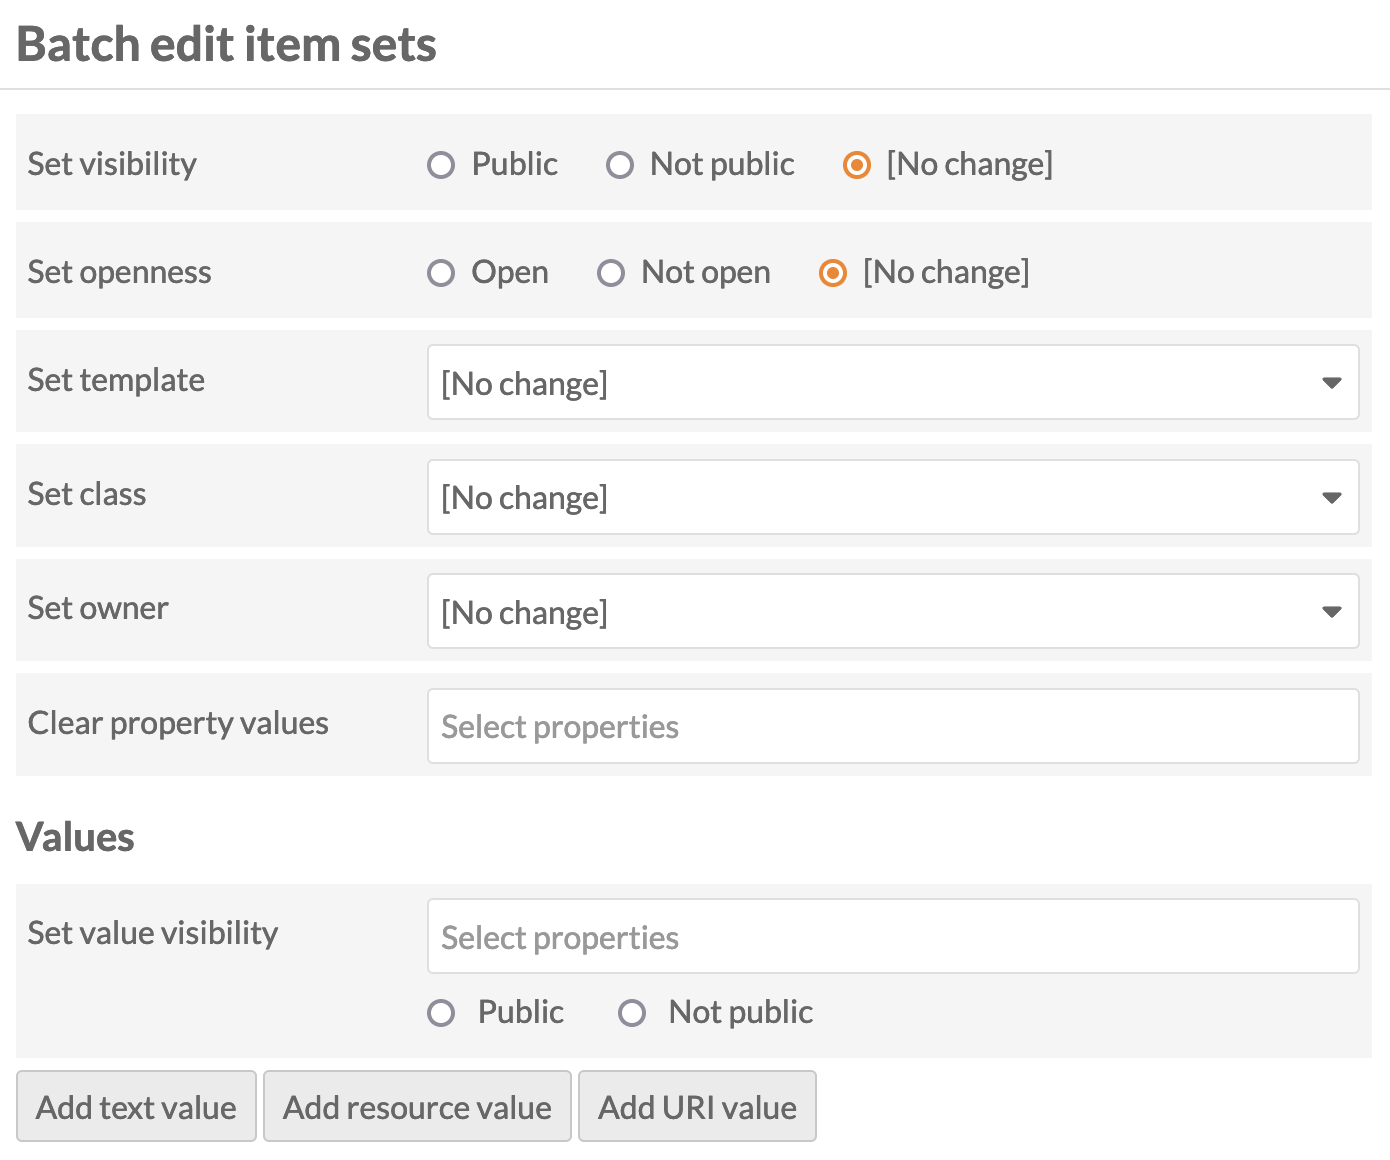 Batch edit items form, with options as described above.